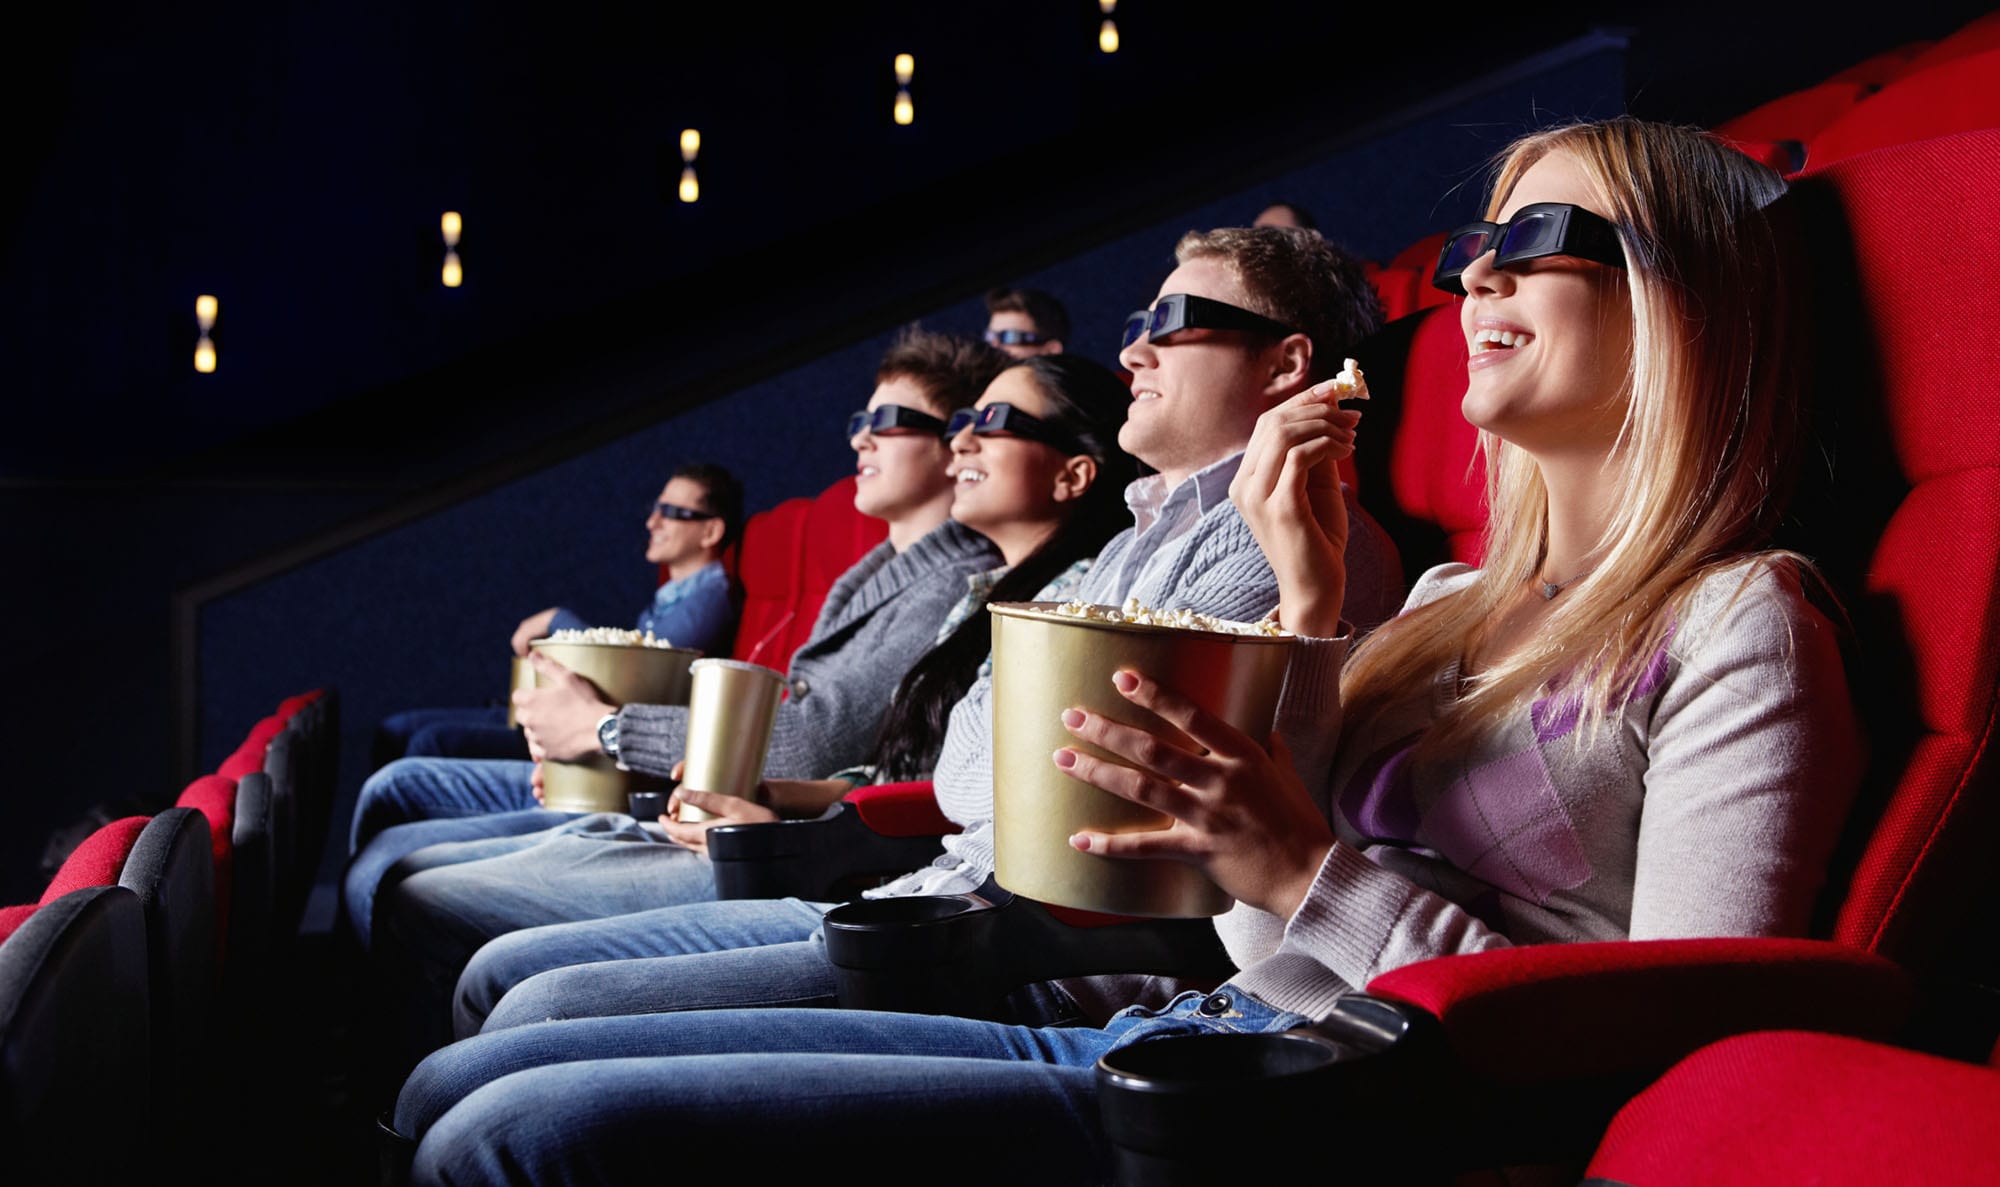 Do you remember when going to the Multiplex cinema was the highlight of the weekend? Let's explore how movie theaters are ignoring the power of streaming.